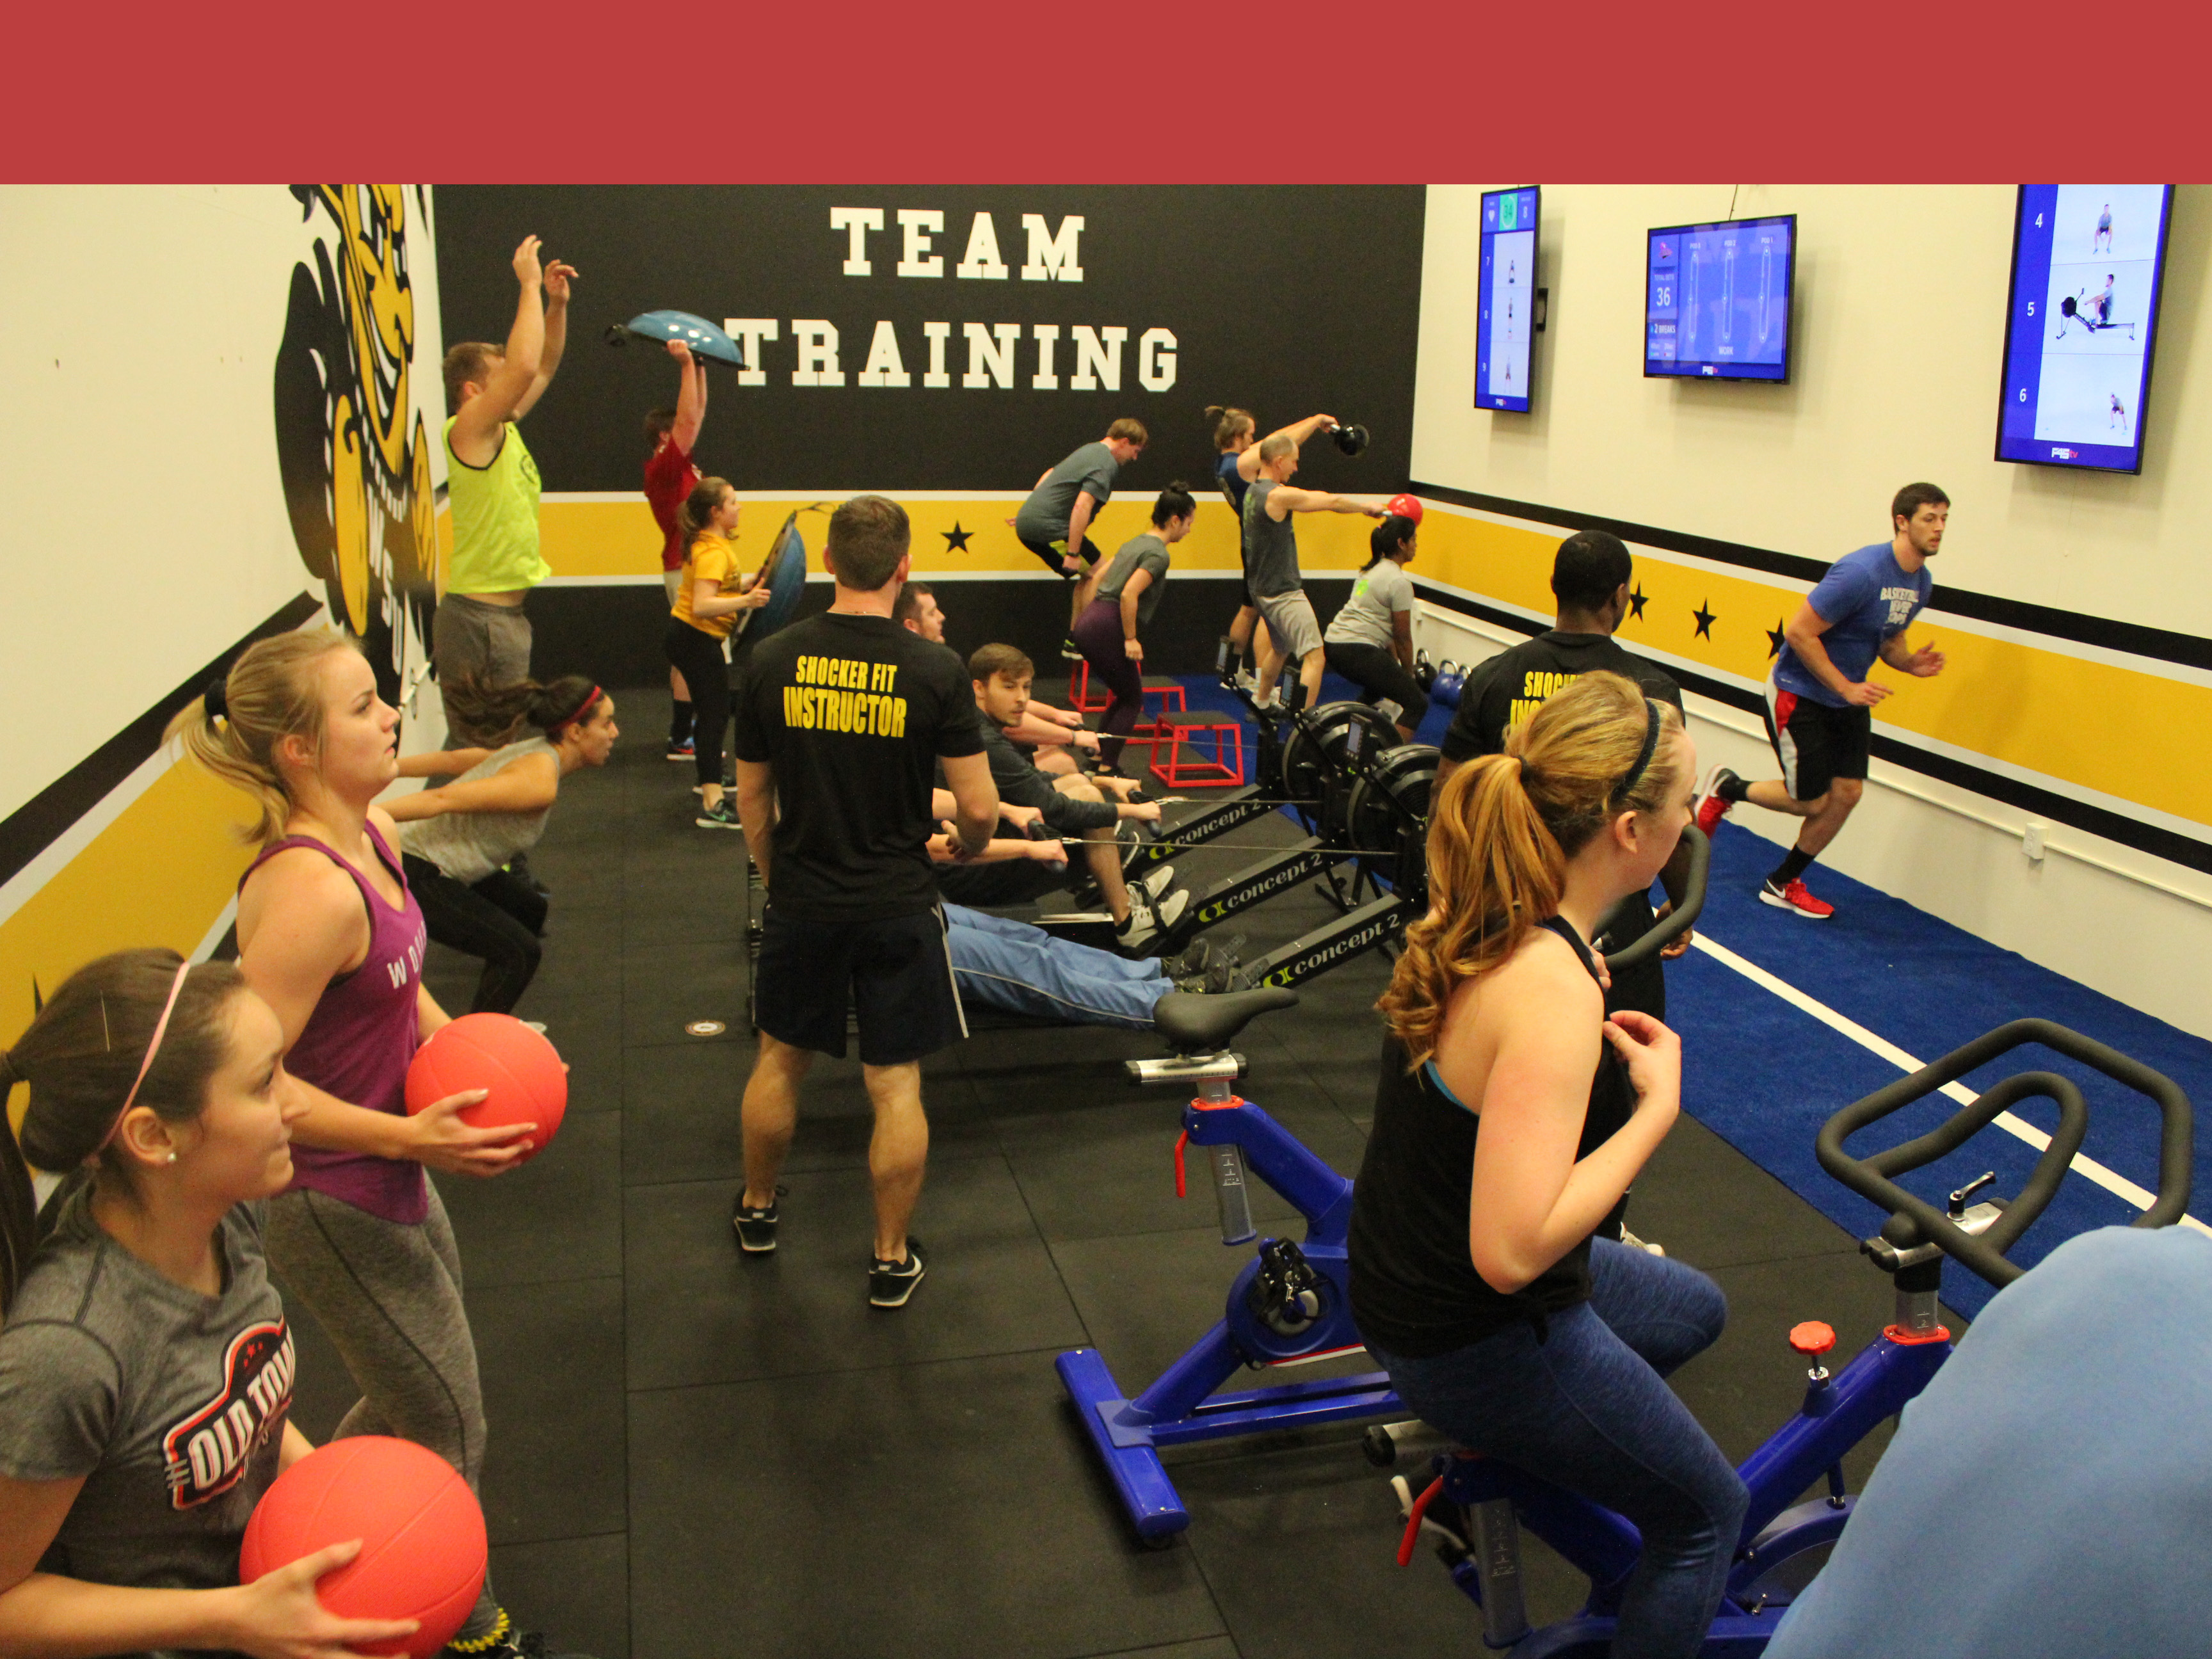 Group of people participating in F45 class. There are lots of excersizes going on, including bliking, medicine ball, kettleball, running, and rowing machine. the instructor is walking through this mess.